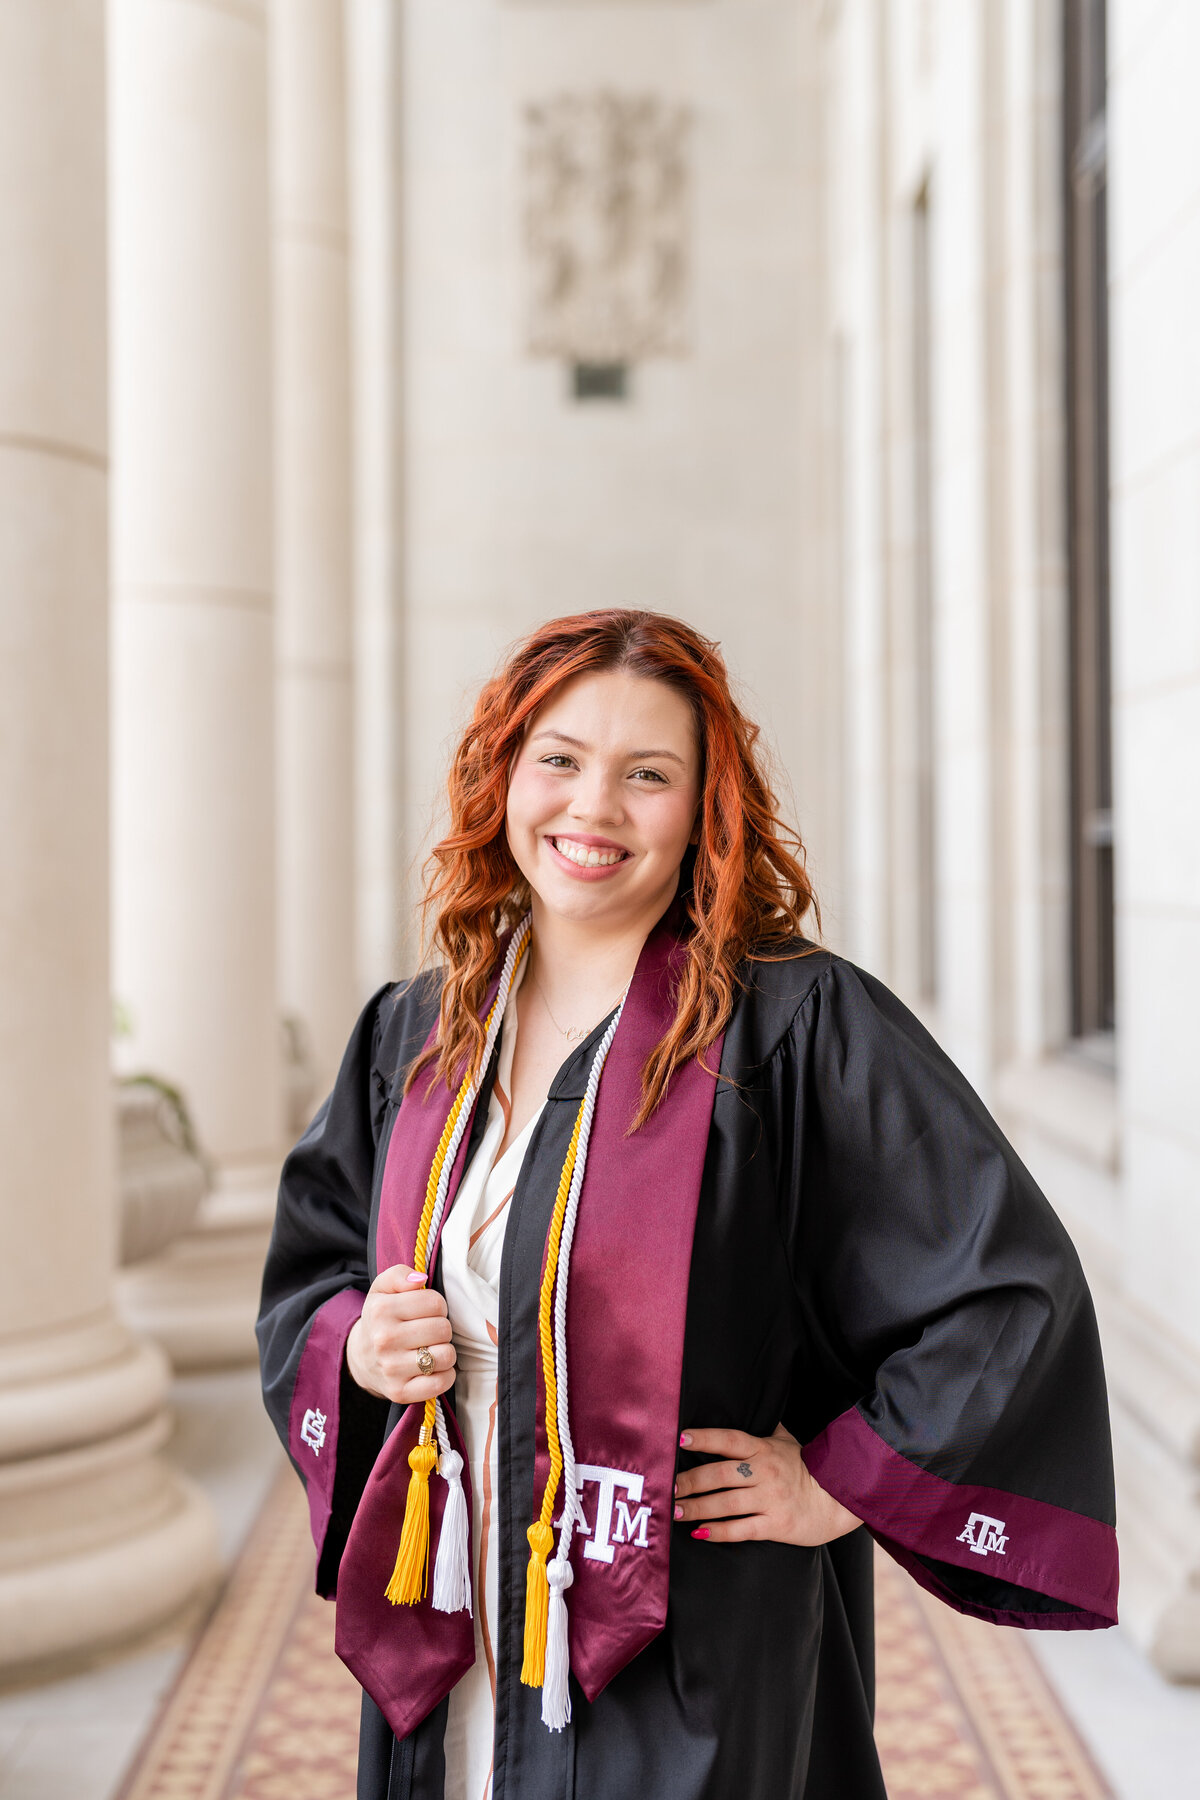 Texas A&M senior girl wearing grad gown, Aggie stole and cords with hand on hip while smiling in the columns of the Administration Building